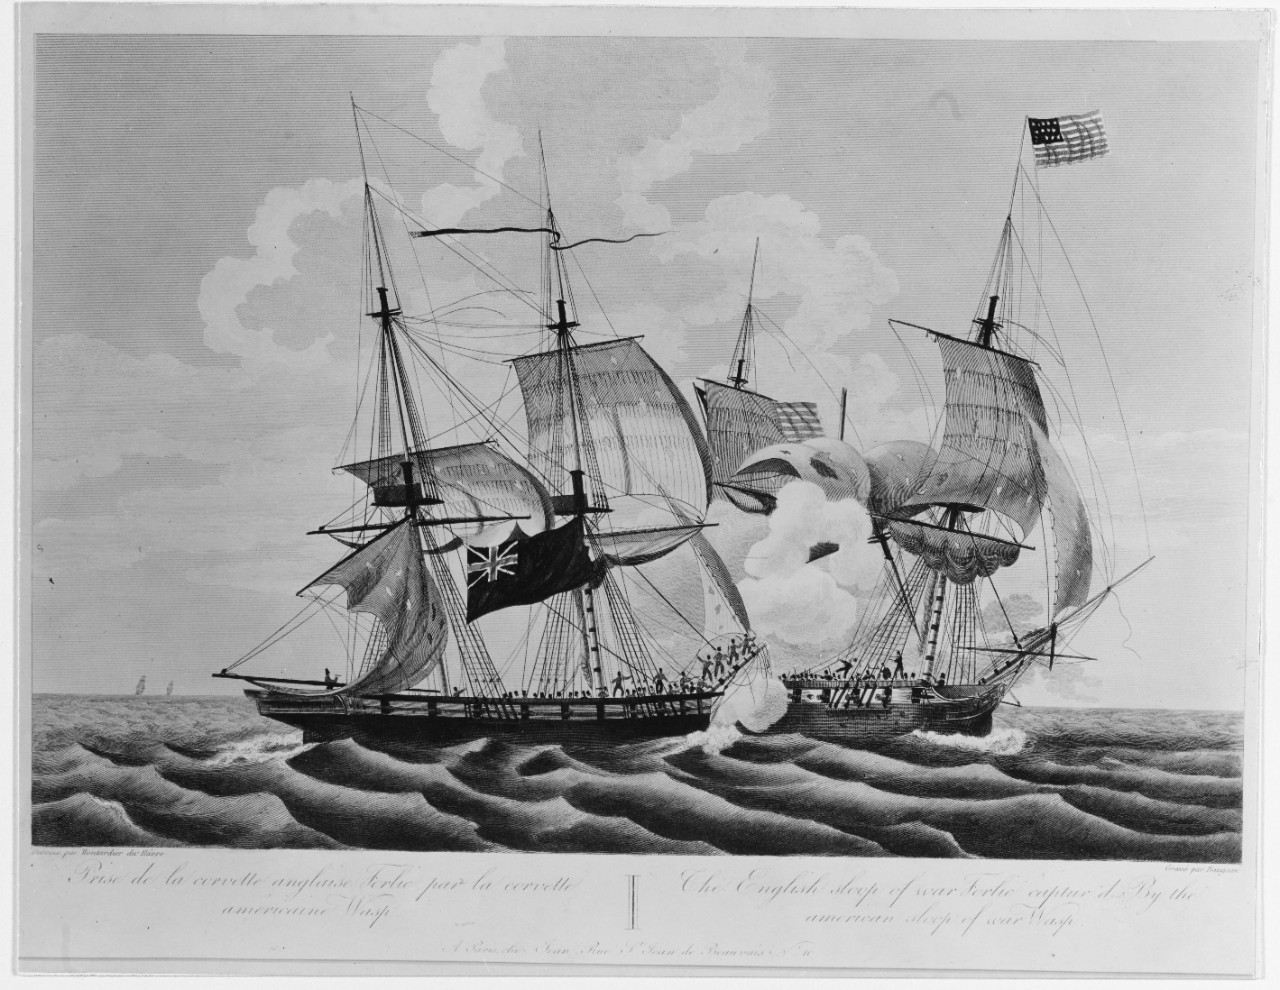 The English sloop of war FROLIC captured by the American sloop of war WASP, 18 October 1812.